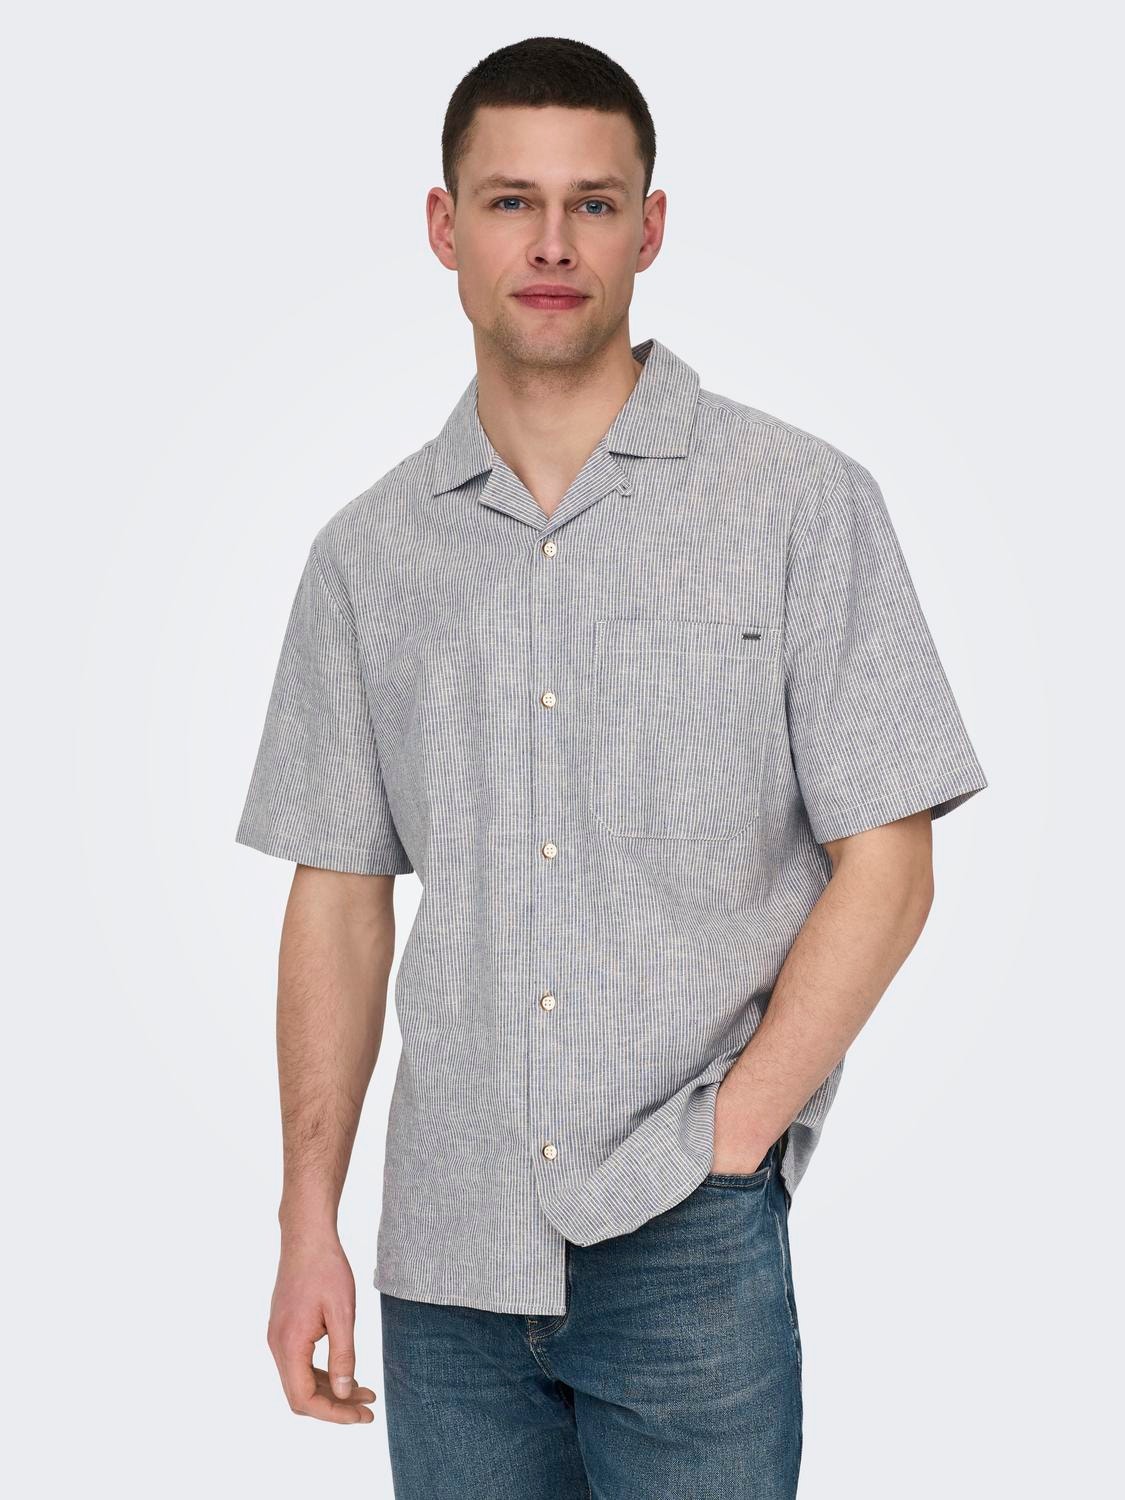 ONLY & SONS Relaxed Fit Resort collar Shirt -Bering Sea - 22028833